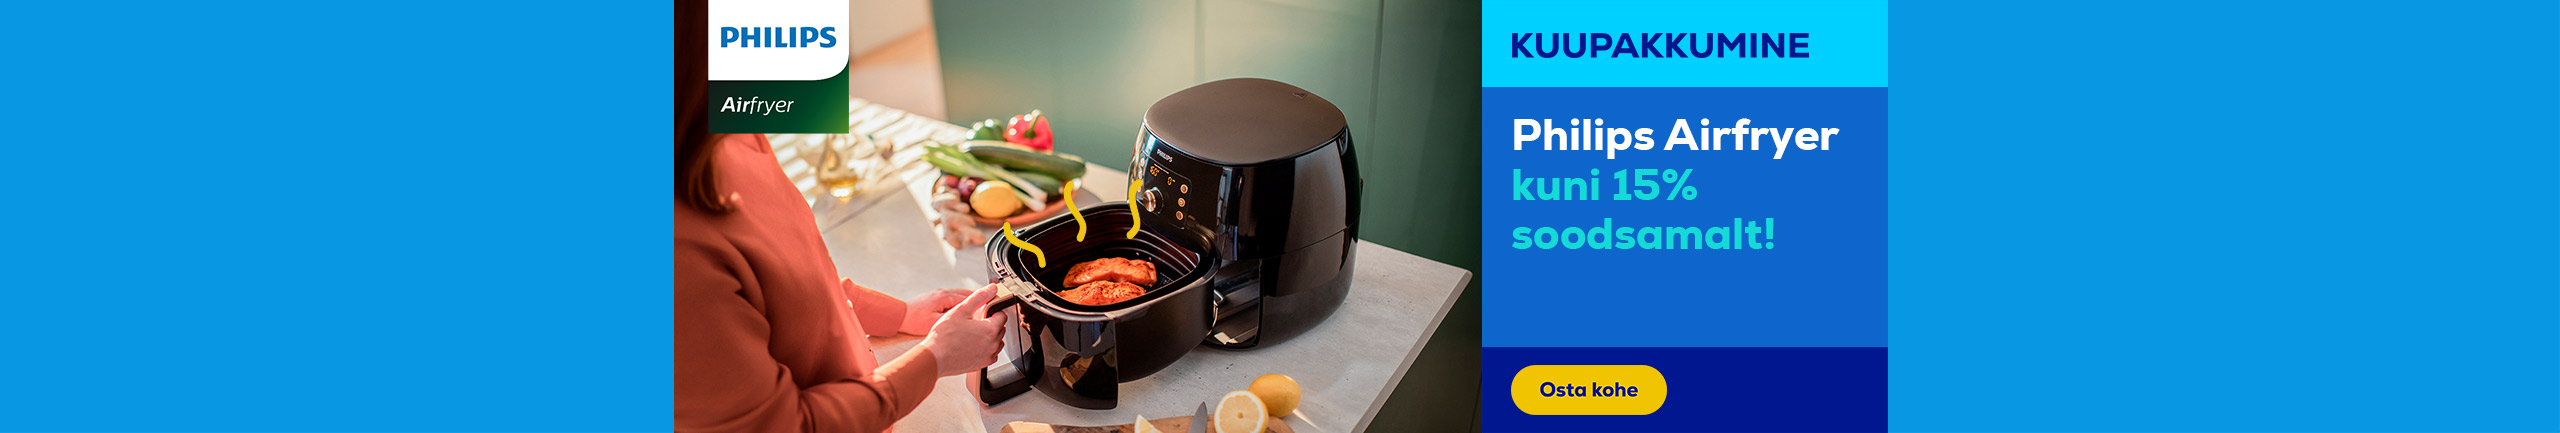 Philips Airfryer at a good price!